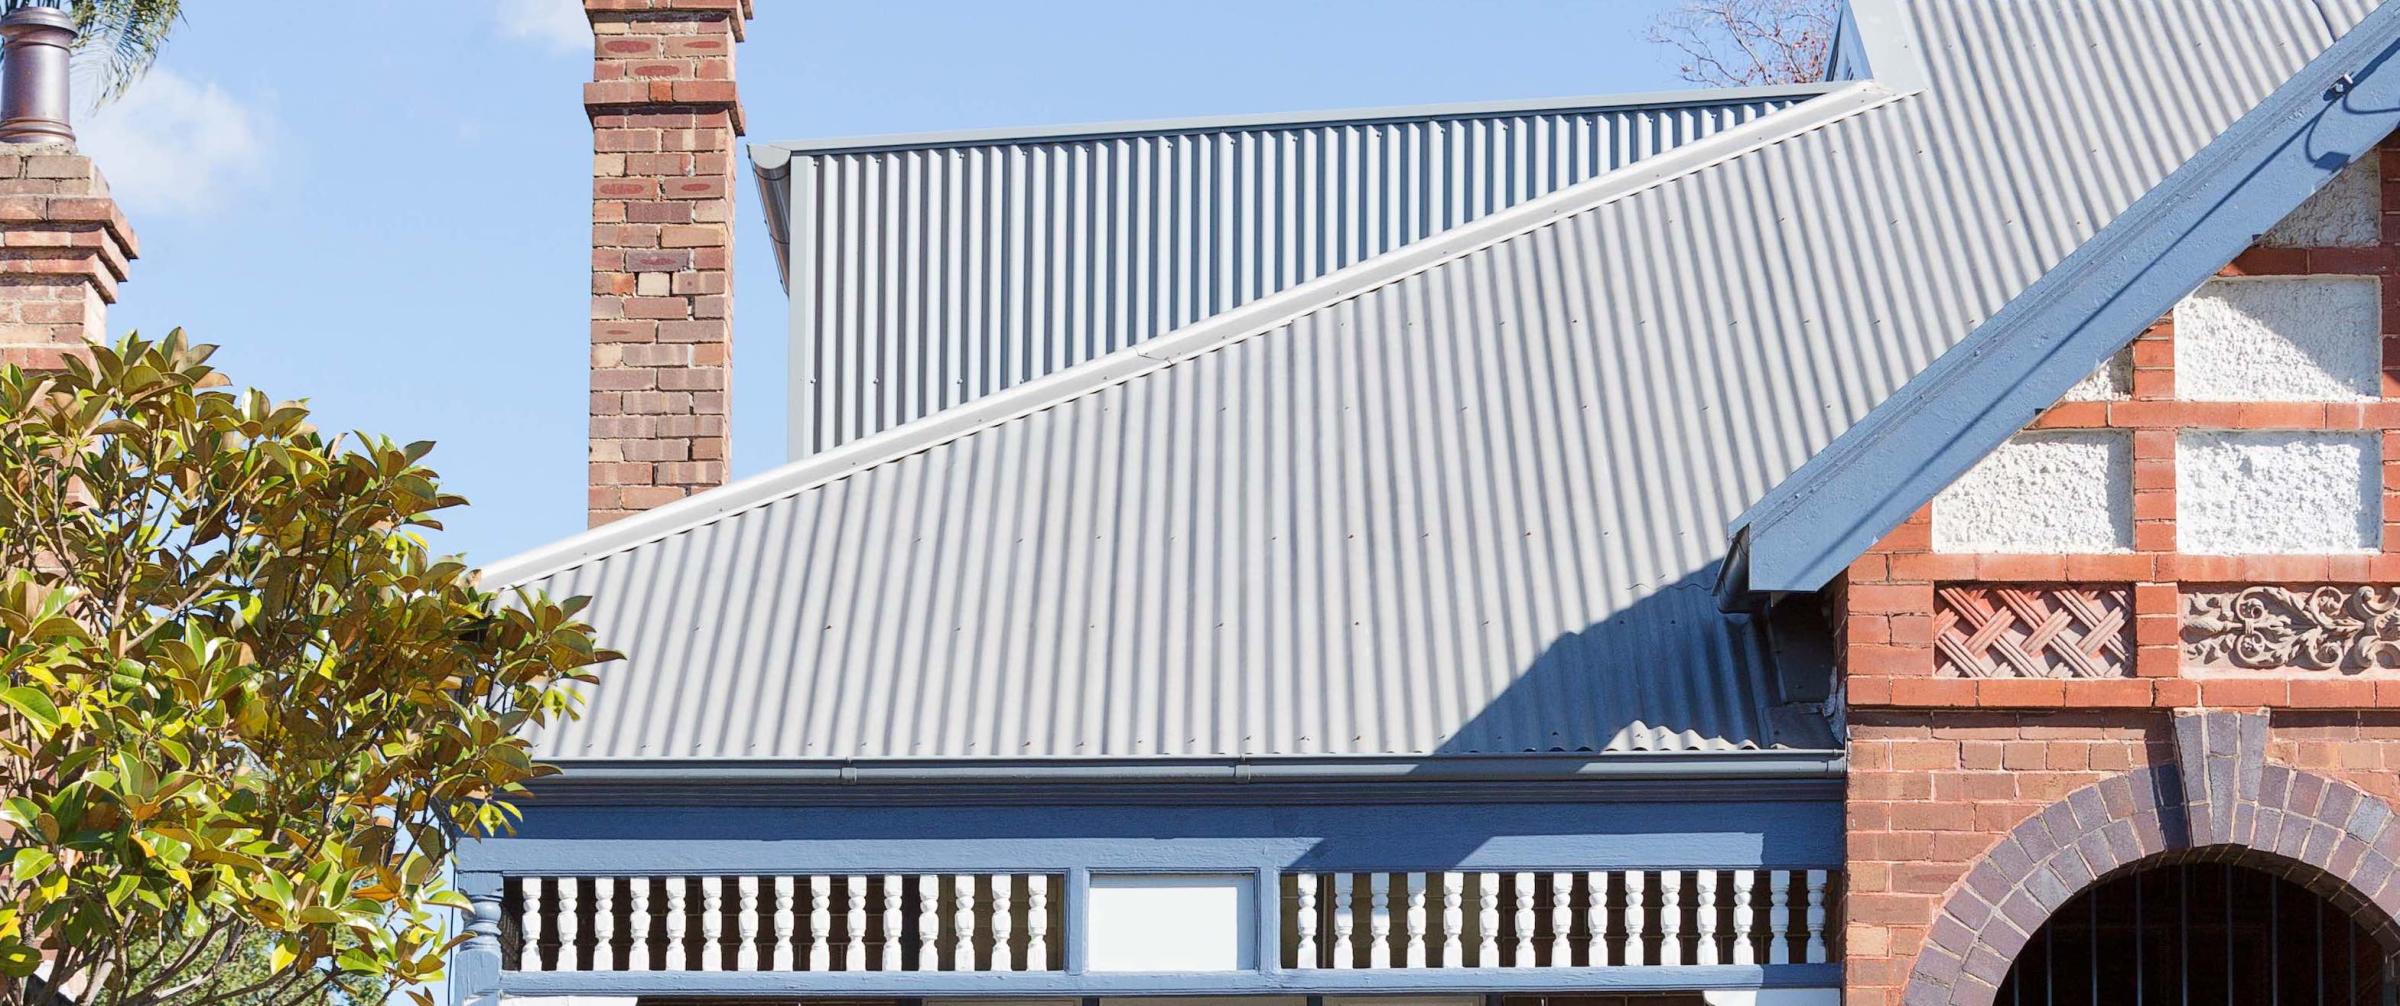 COLORBOND® steel Windspray® roofing in LYSAGHT CUSTOM ORB ACCENT® 21 and CUSTOM ORB ACCENT® 35 profile.